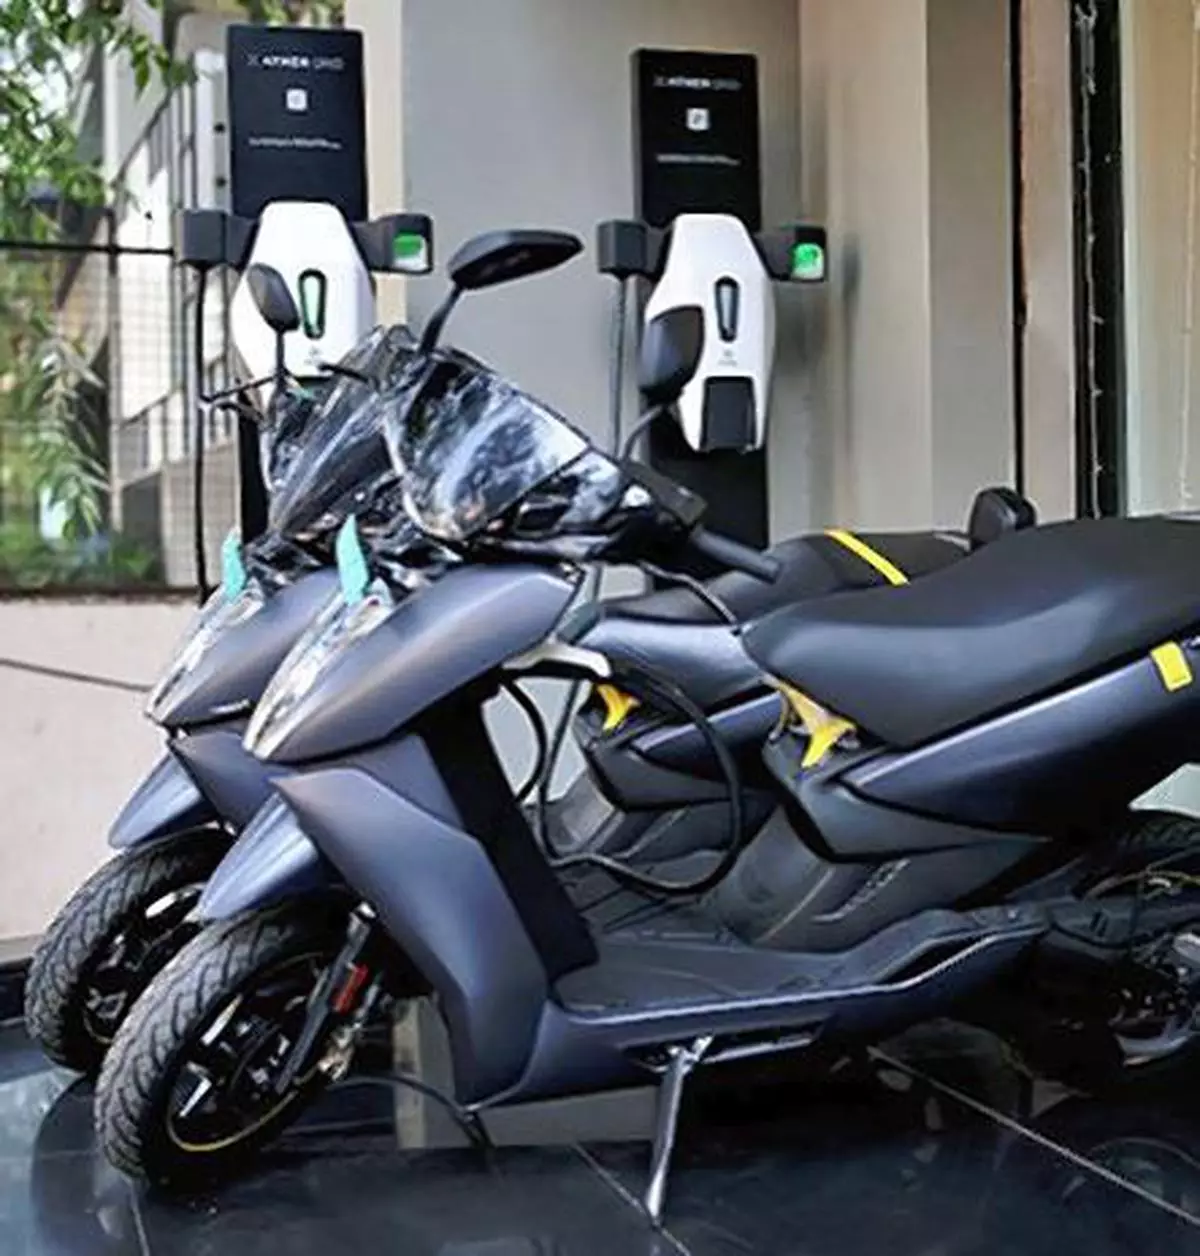 Ather Energy’s electric two-wheeler registrations stood at 5,258 units